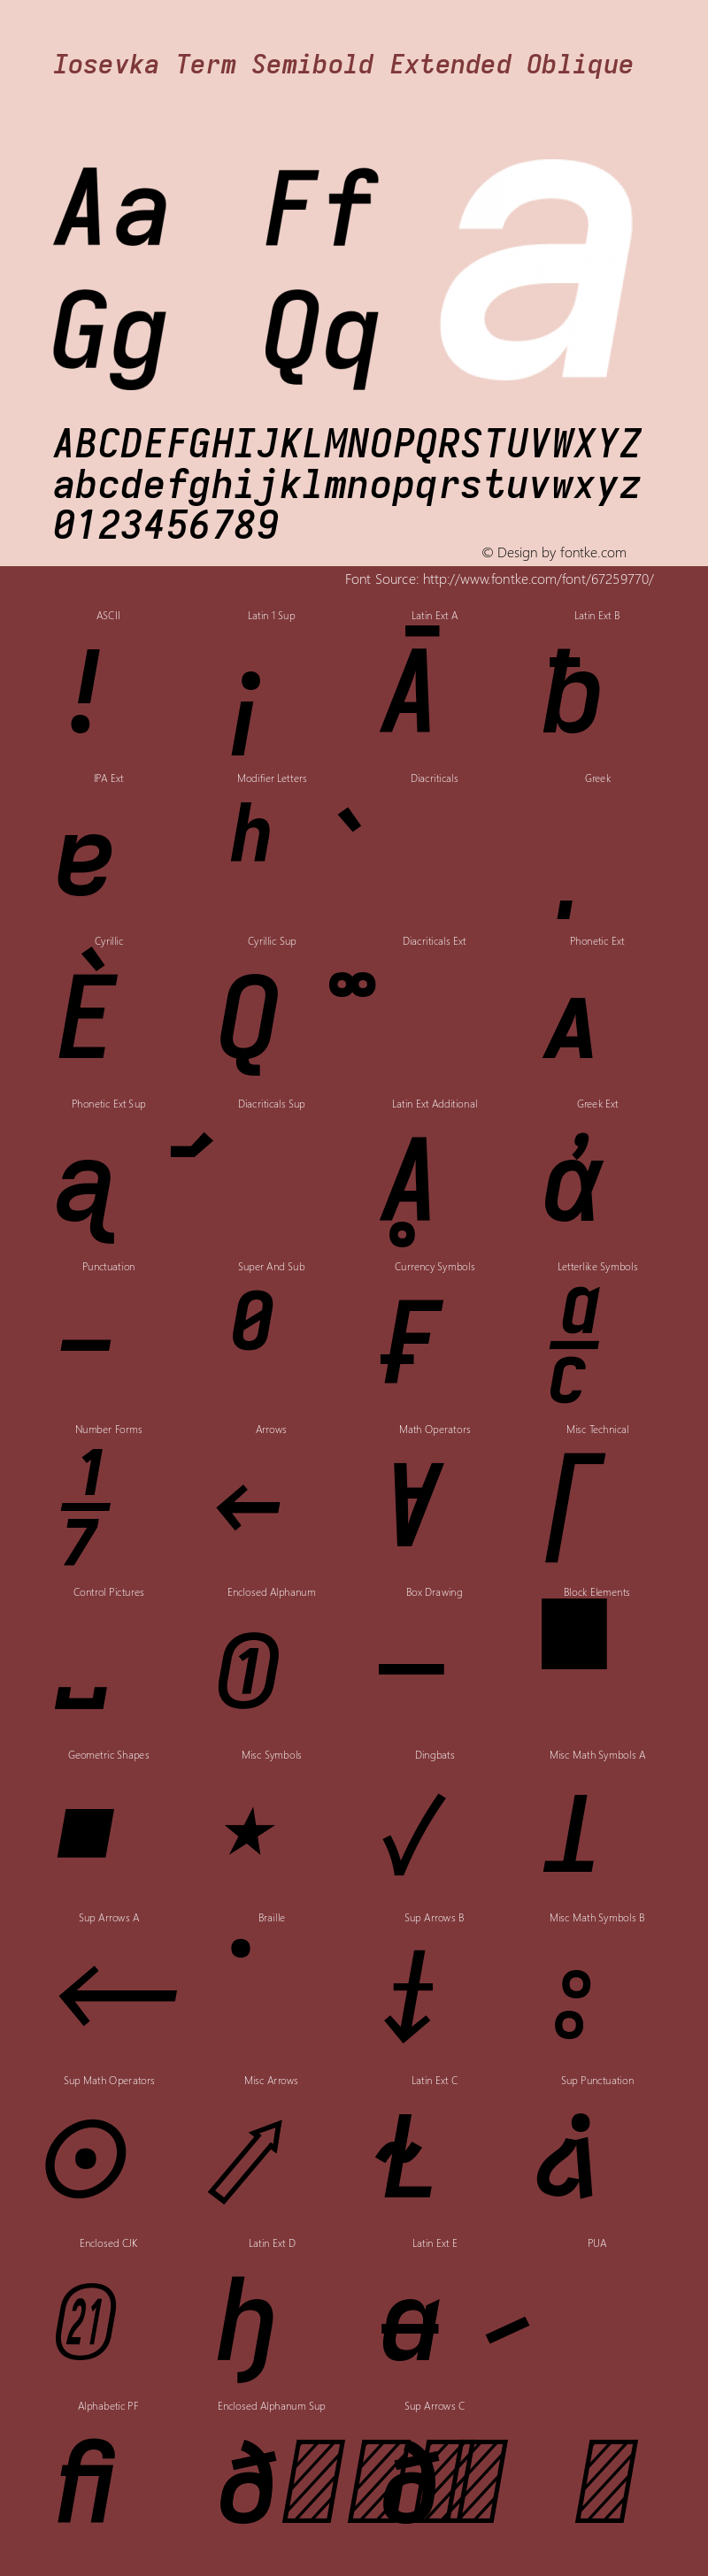 Iosevka Term Semibold Extended Oblique 3.0.0-rc.7 Font Sample